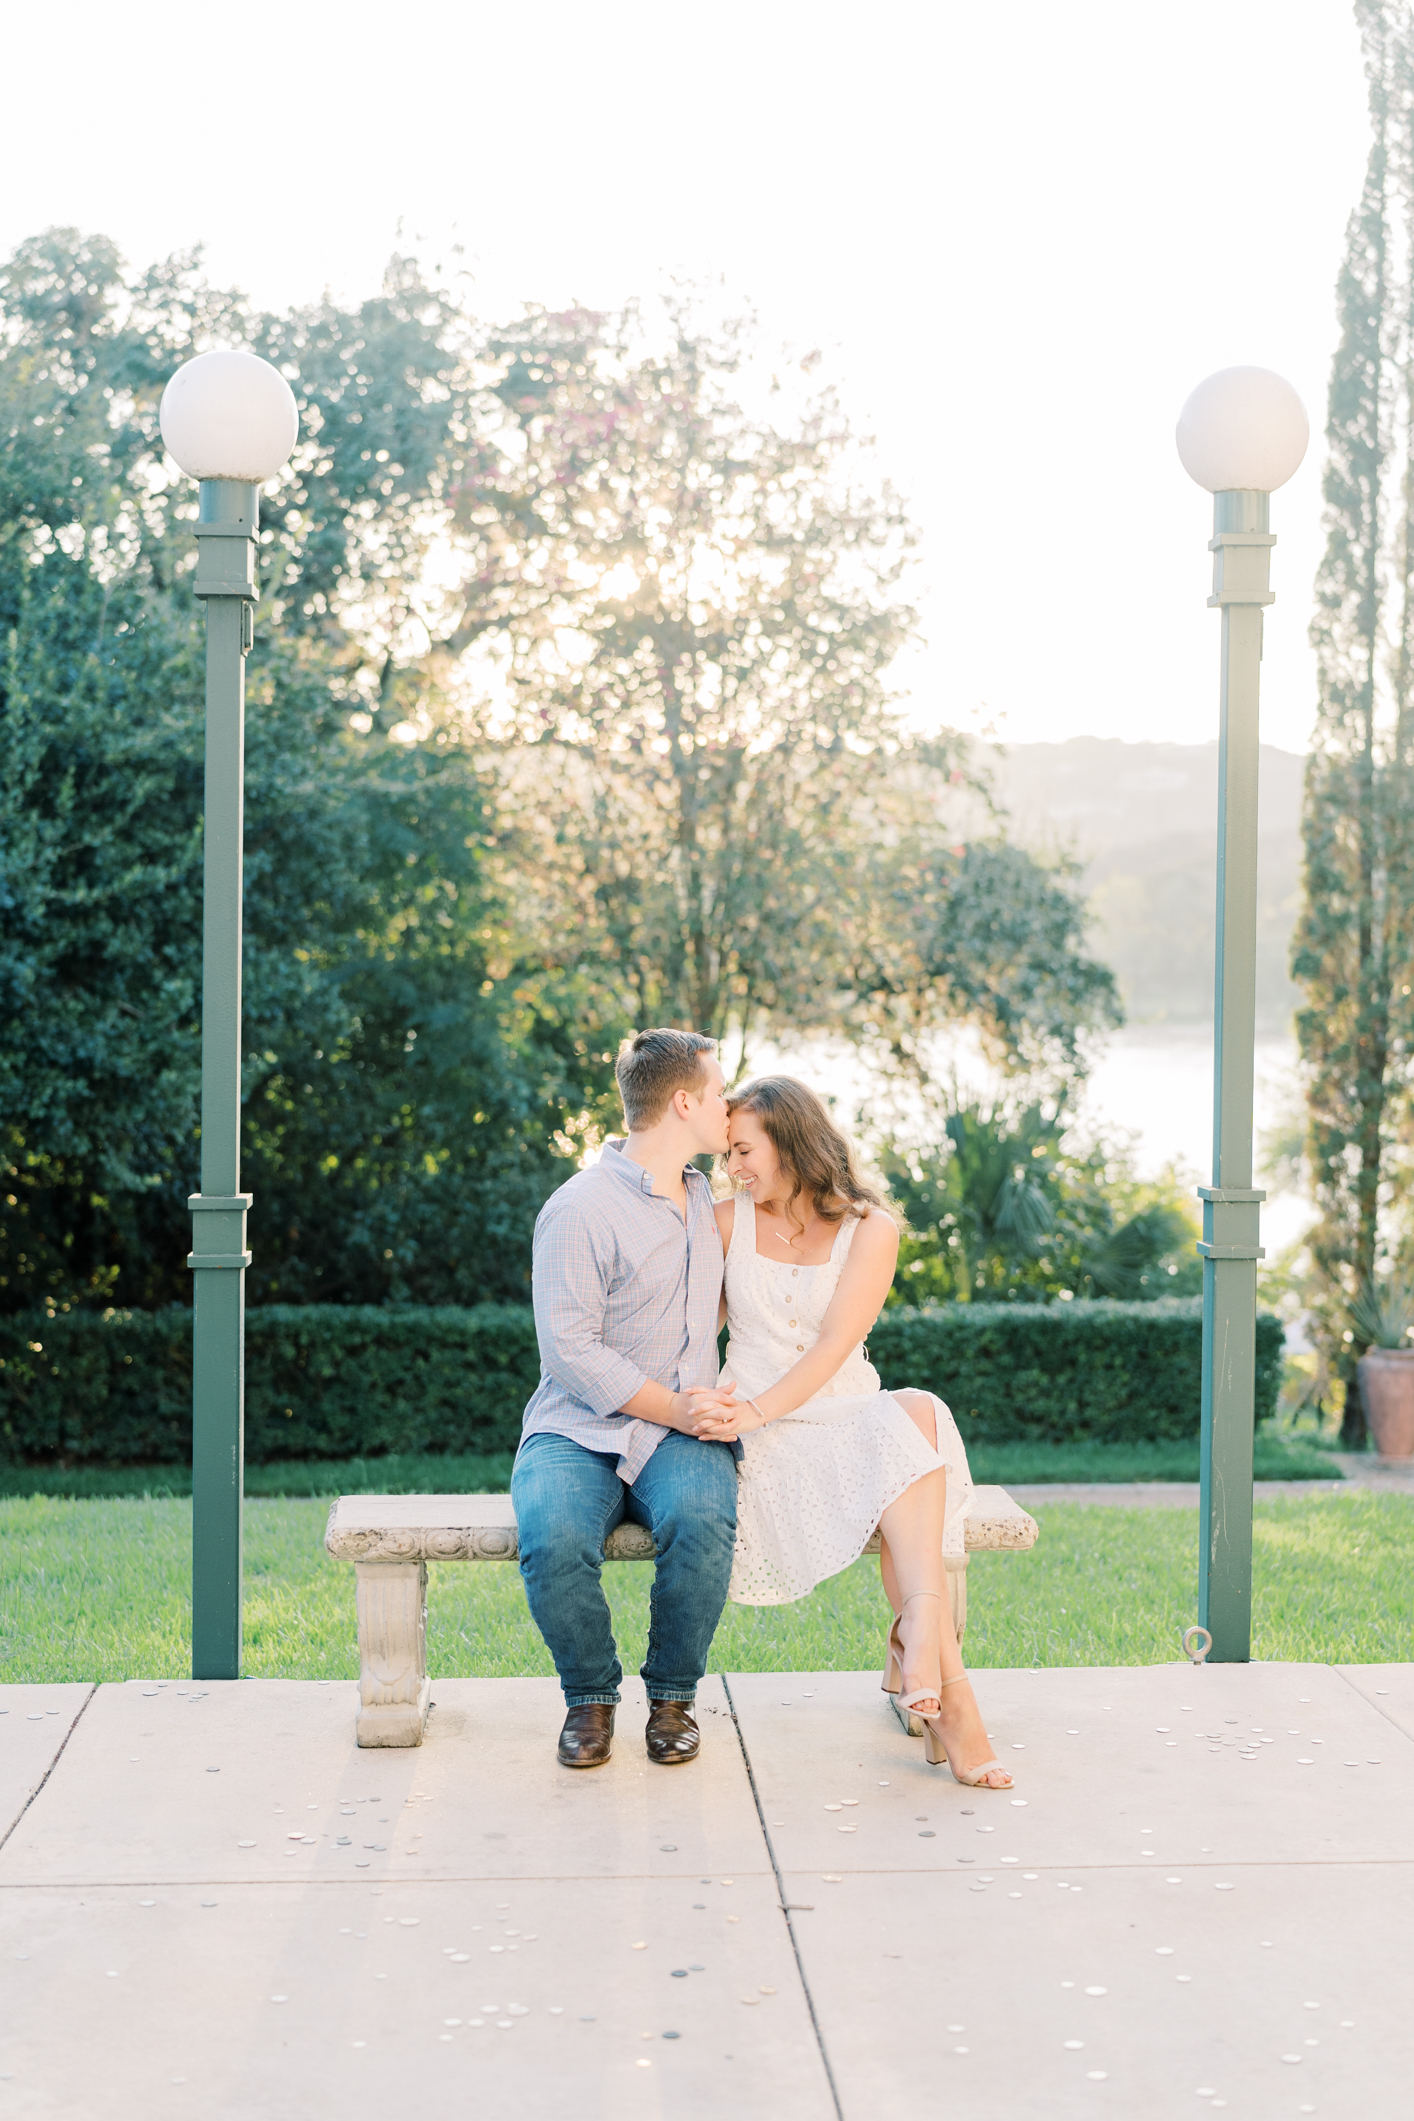 Popping champagne and watching the sunset over the lake? The best way to end a Laguna Gloria engagement session in my eyes!! This is my favorite Austin, TX engagement session location ever! Click through to see how adorable Emily and Trevor are...and see some serious outfit inspo! #engagementsessionoutfitinspo #atxengagementsession #lagunagloria